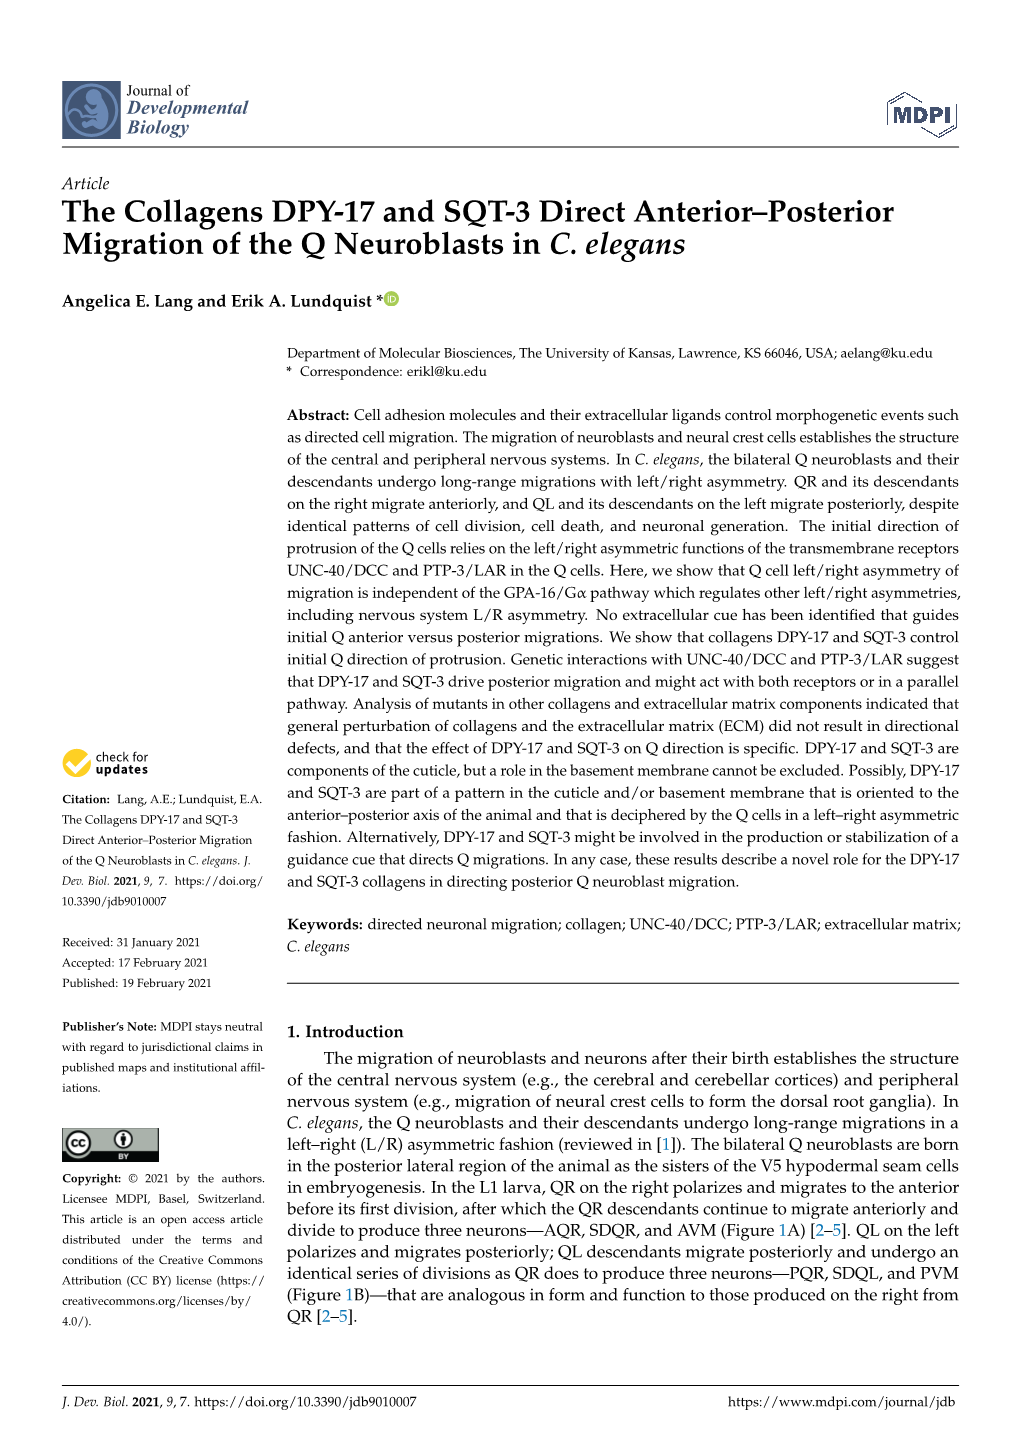 The Collagens DPY-17 and SQT-3 Direct Anterior–Posterior Migration of the Q Neuroblasts in C